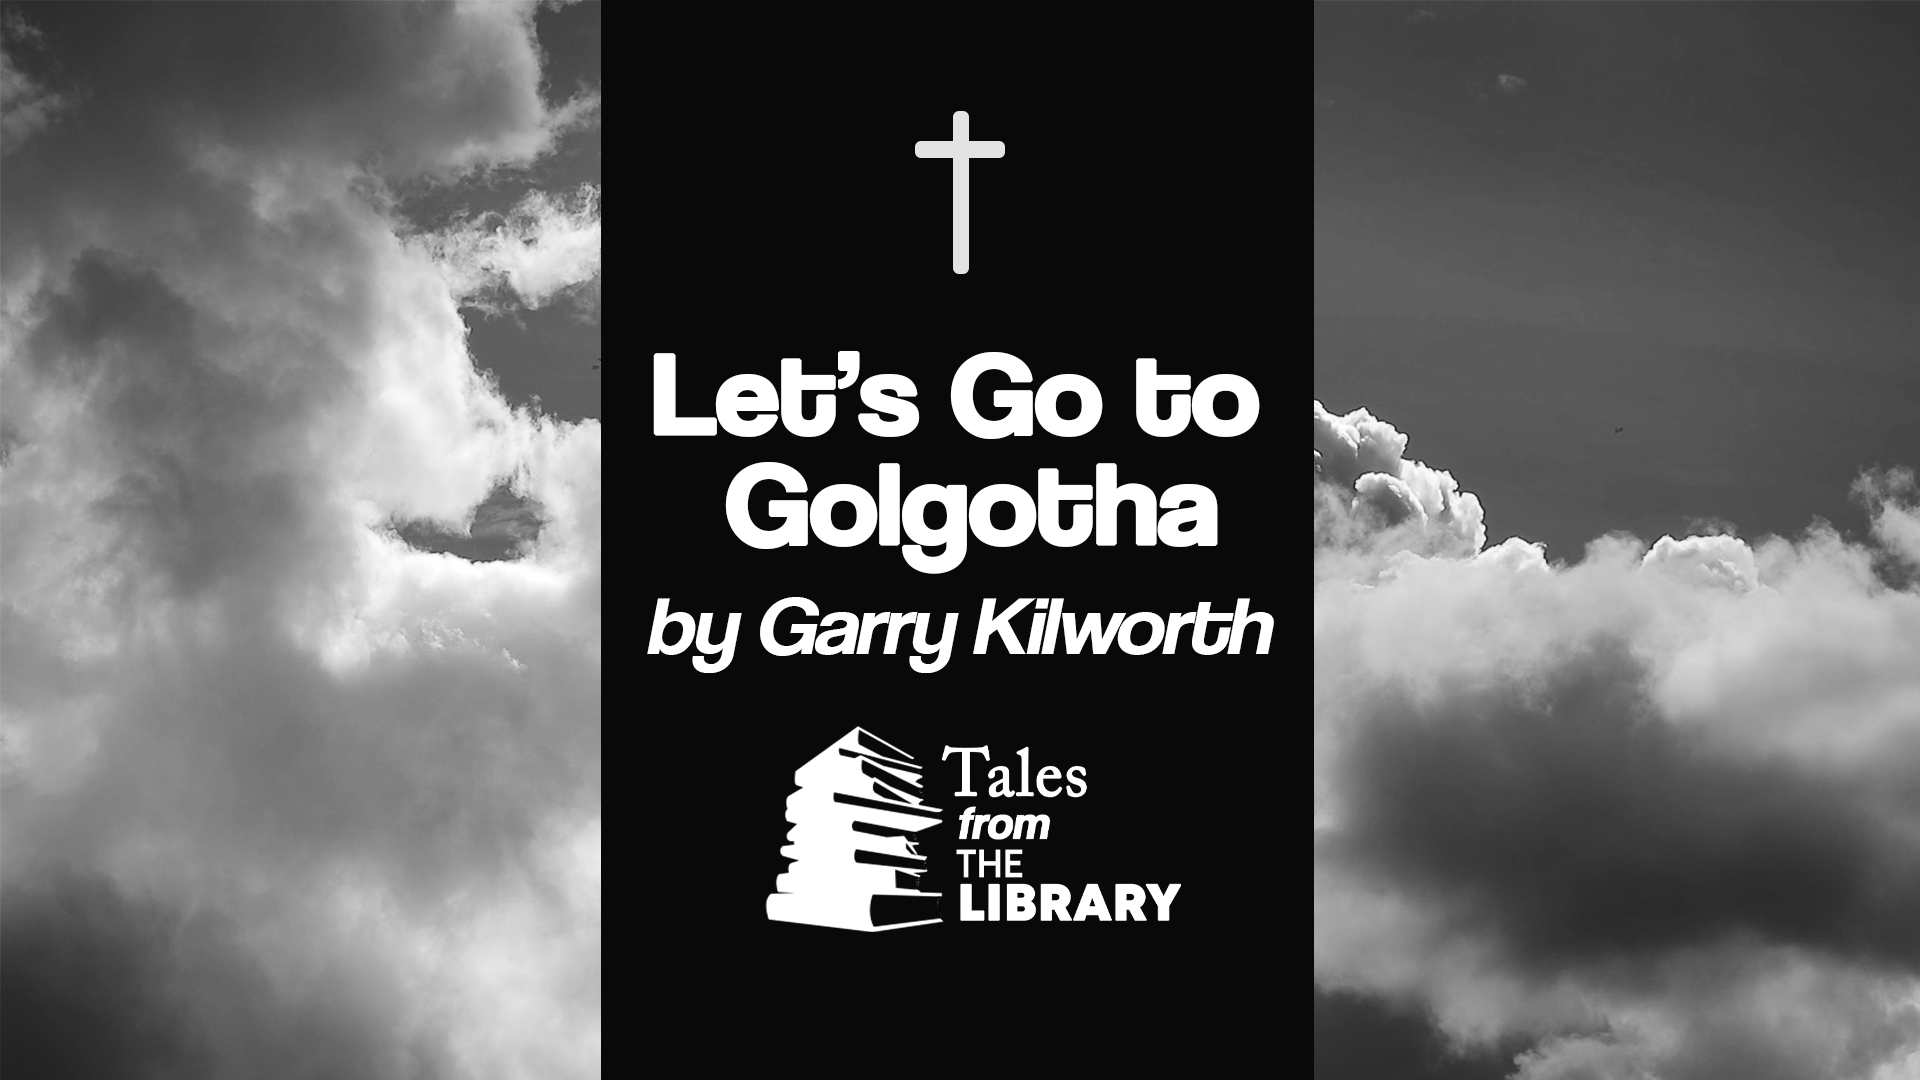 Tales From The Library - Let’s Go to Golgotha